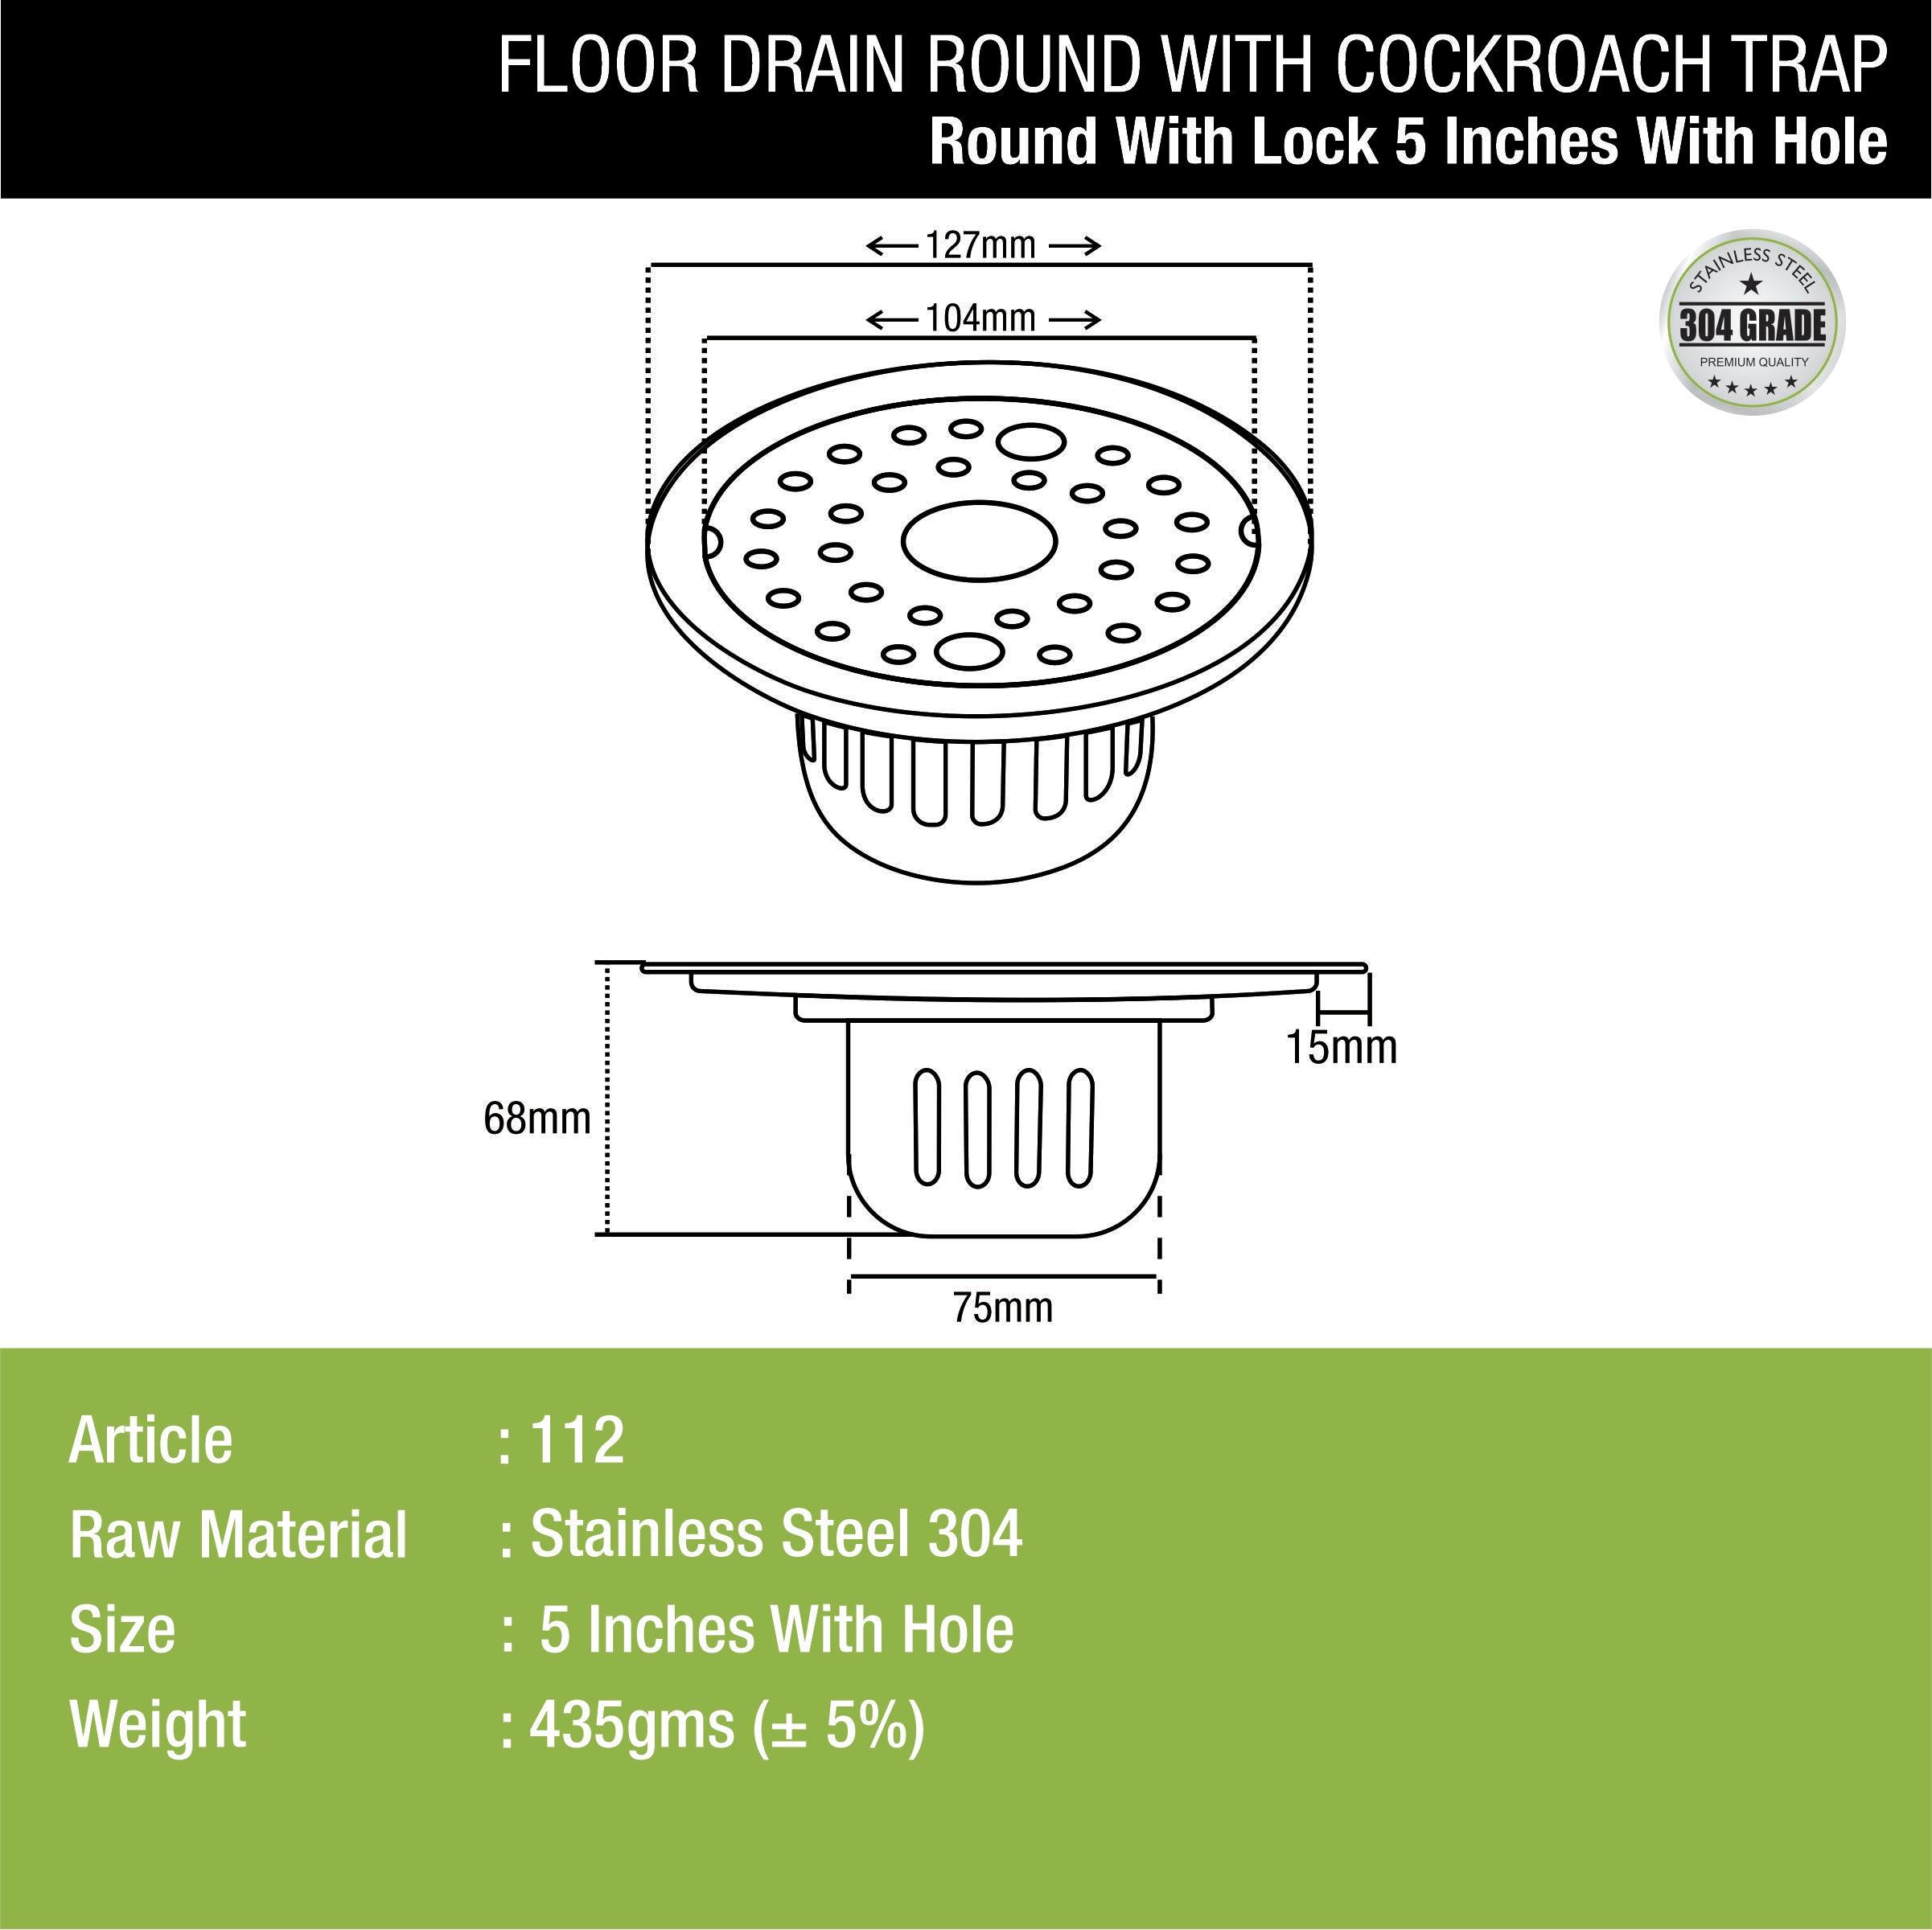 Round Floor Drain (5 inches) with Cockroach Trap, Lock & Hole dimensions and sizes